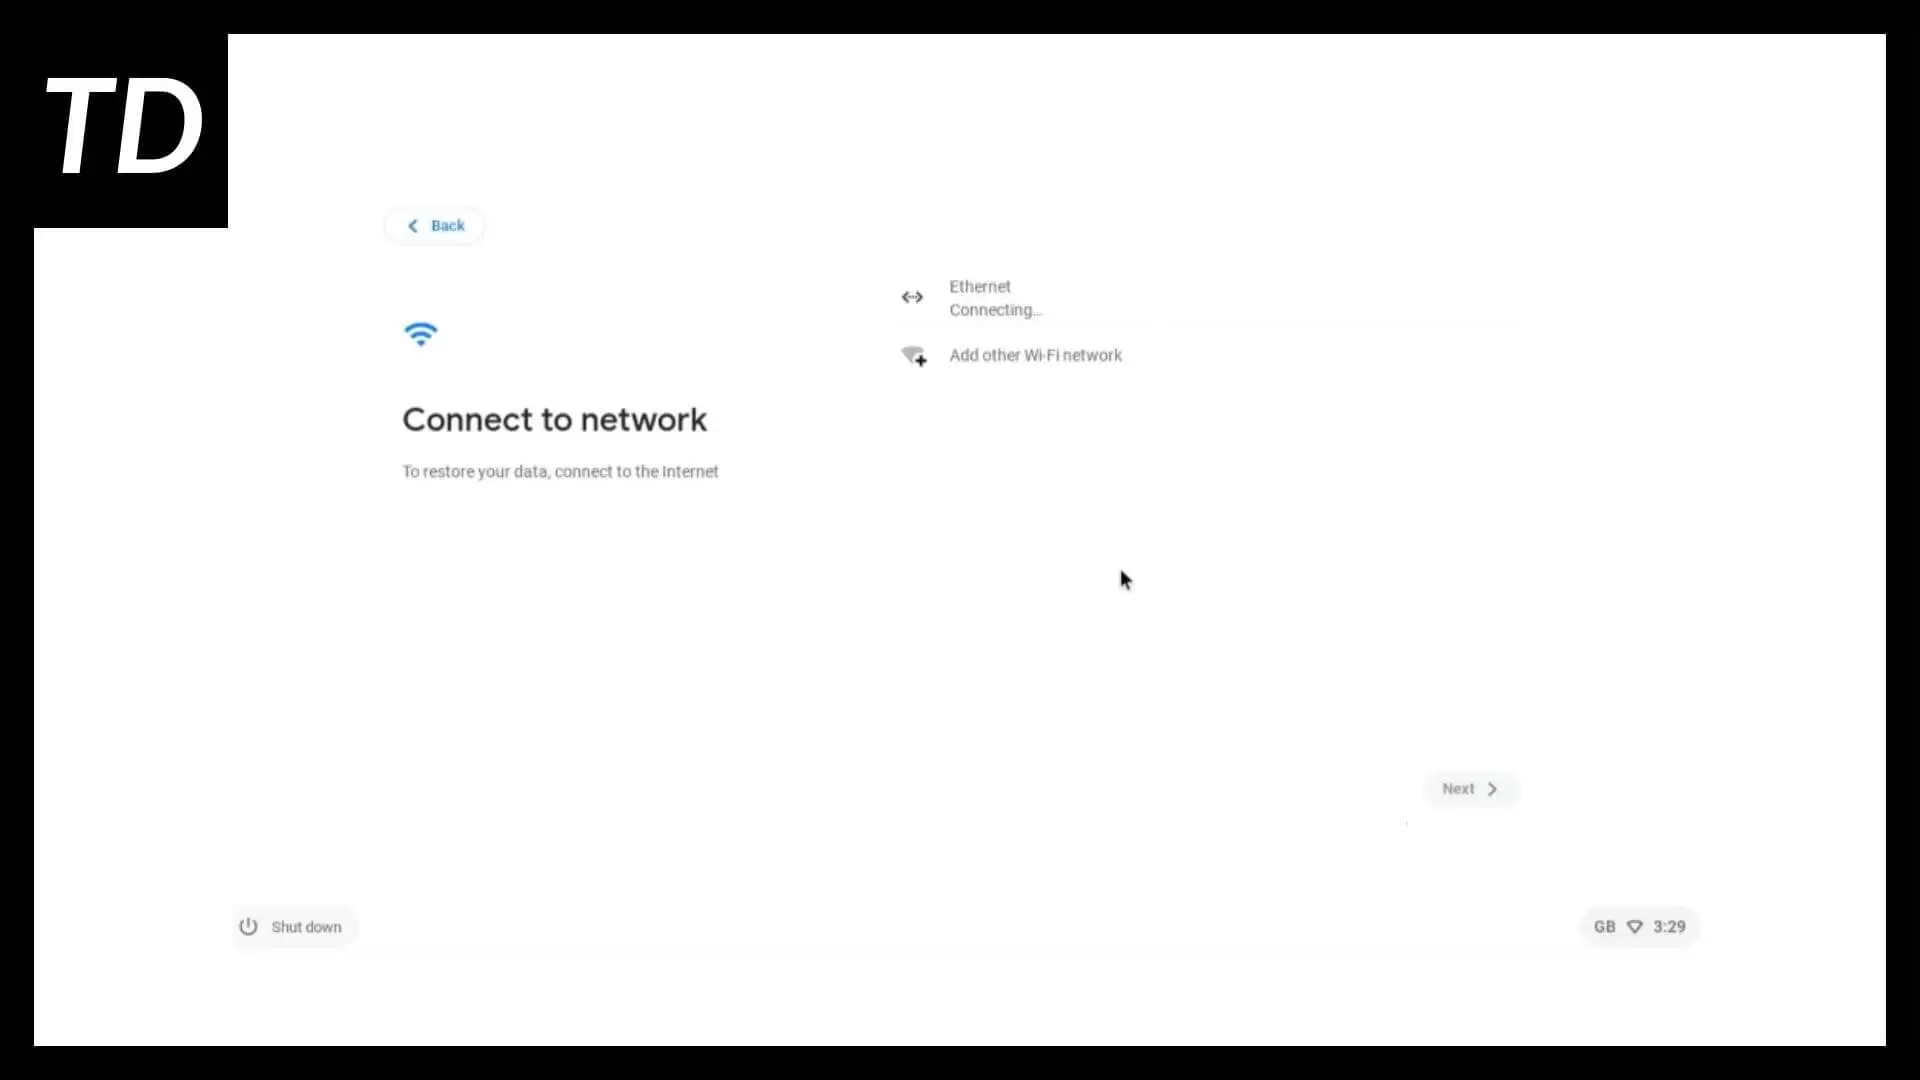 Chrome OS Flex showing prompt to connect to WiFi or Ethernet